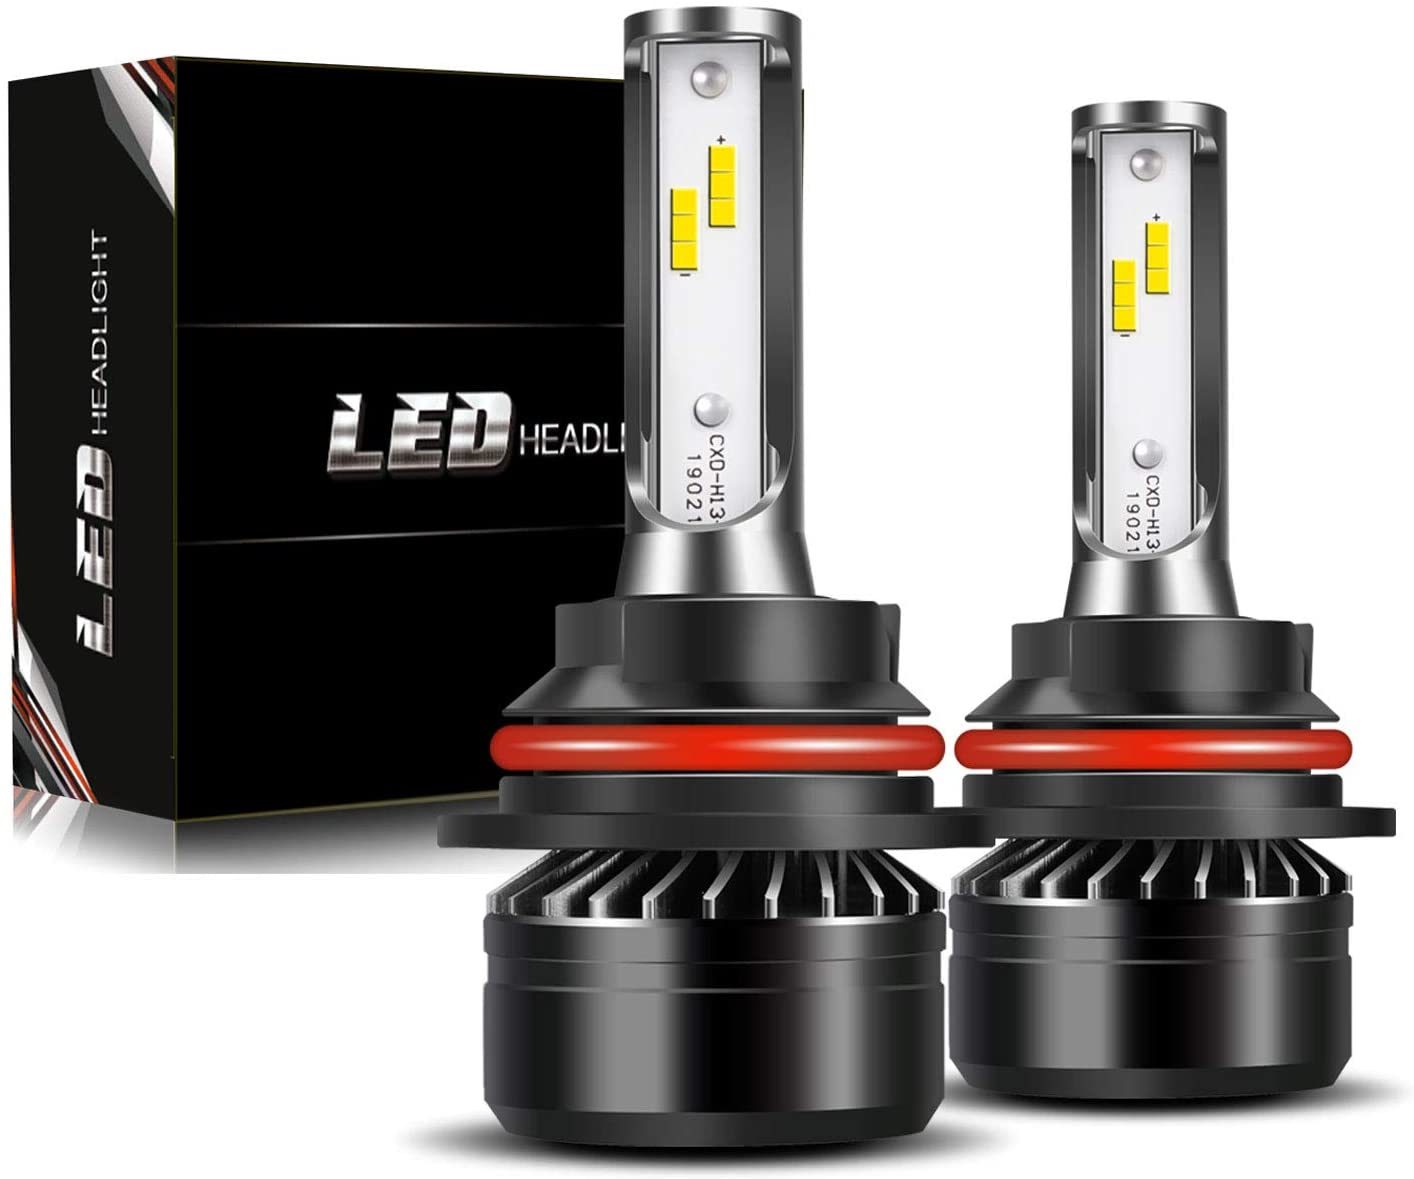 All-in-one Headlight Conversion Kit Bulbs